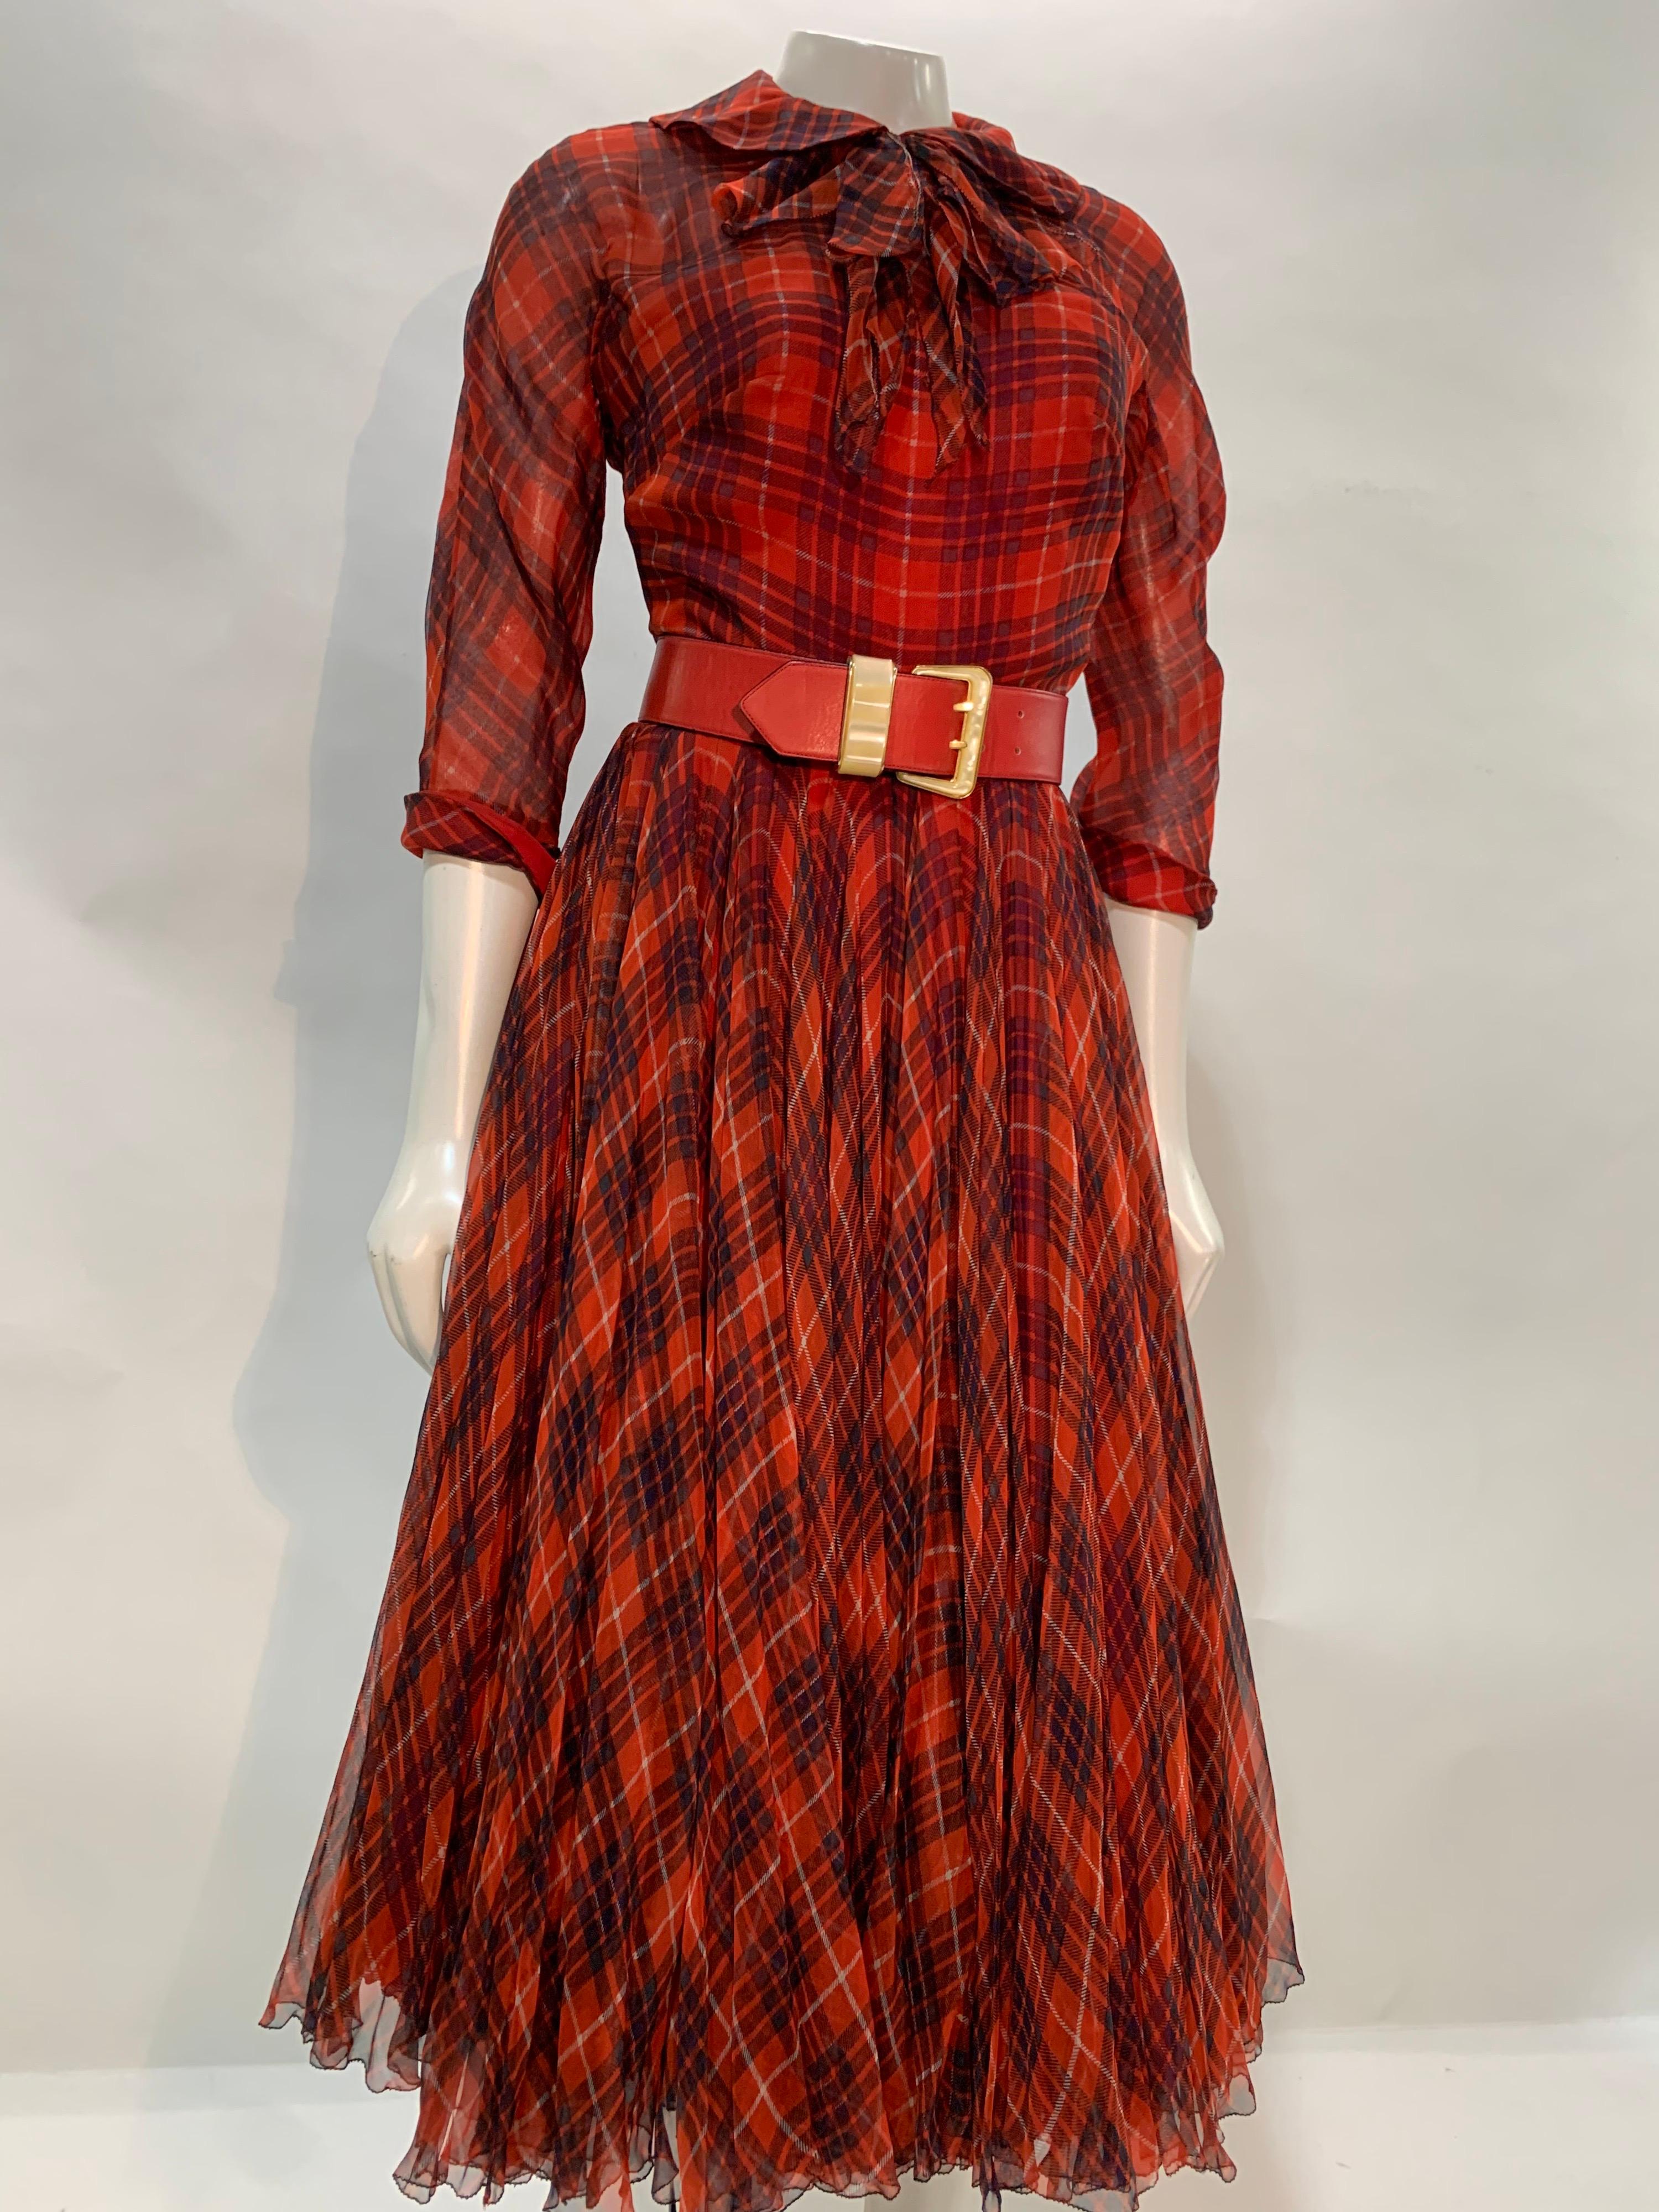 1950 James Galanos Red & Black Plaid Silk Chiffon Dress w/ Structured Under-Bust In Excellent Condition For Sale In Gresham, OR